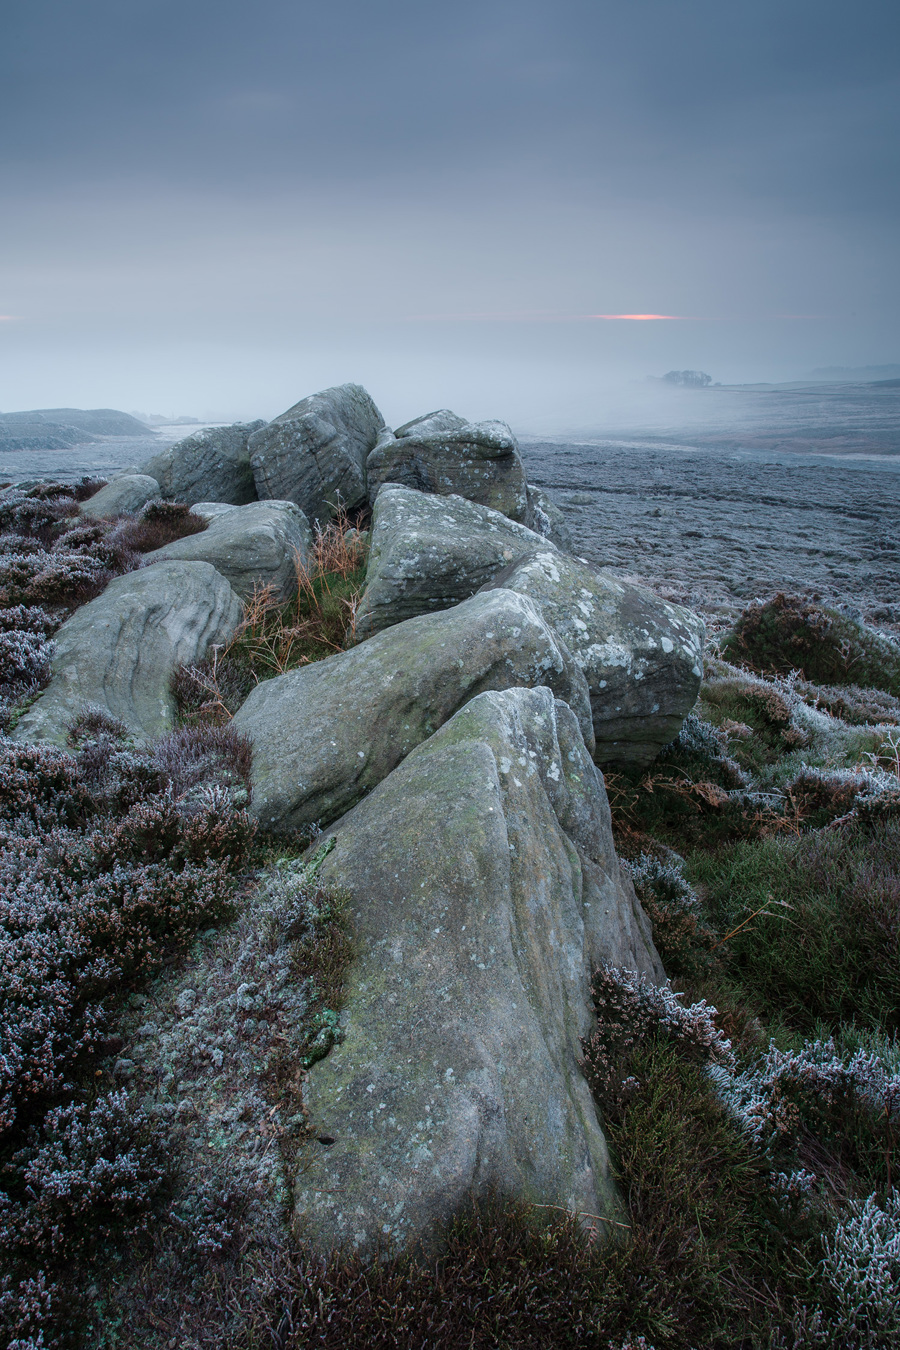 Frosty moorland landscape a close up of a rock